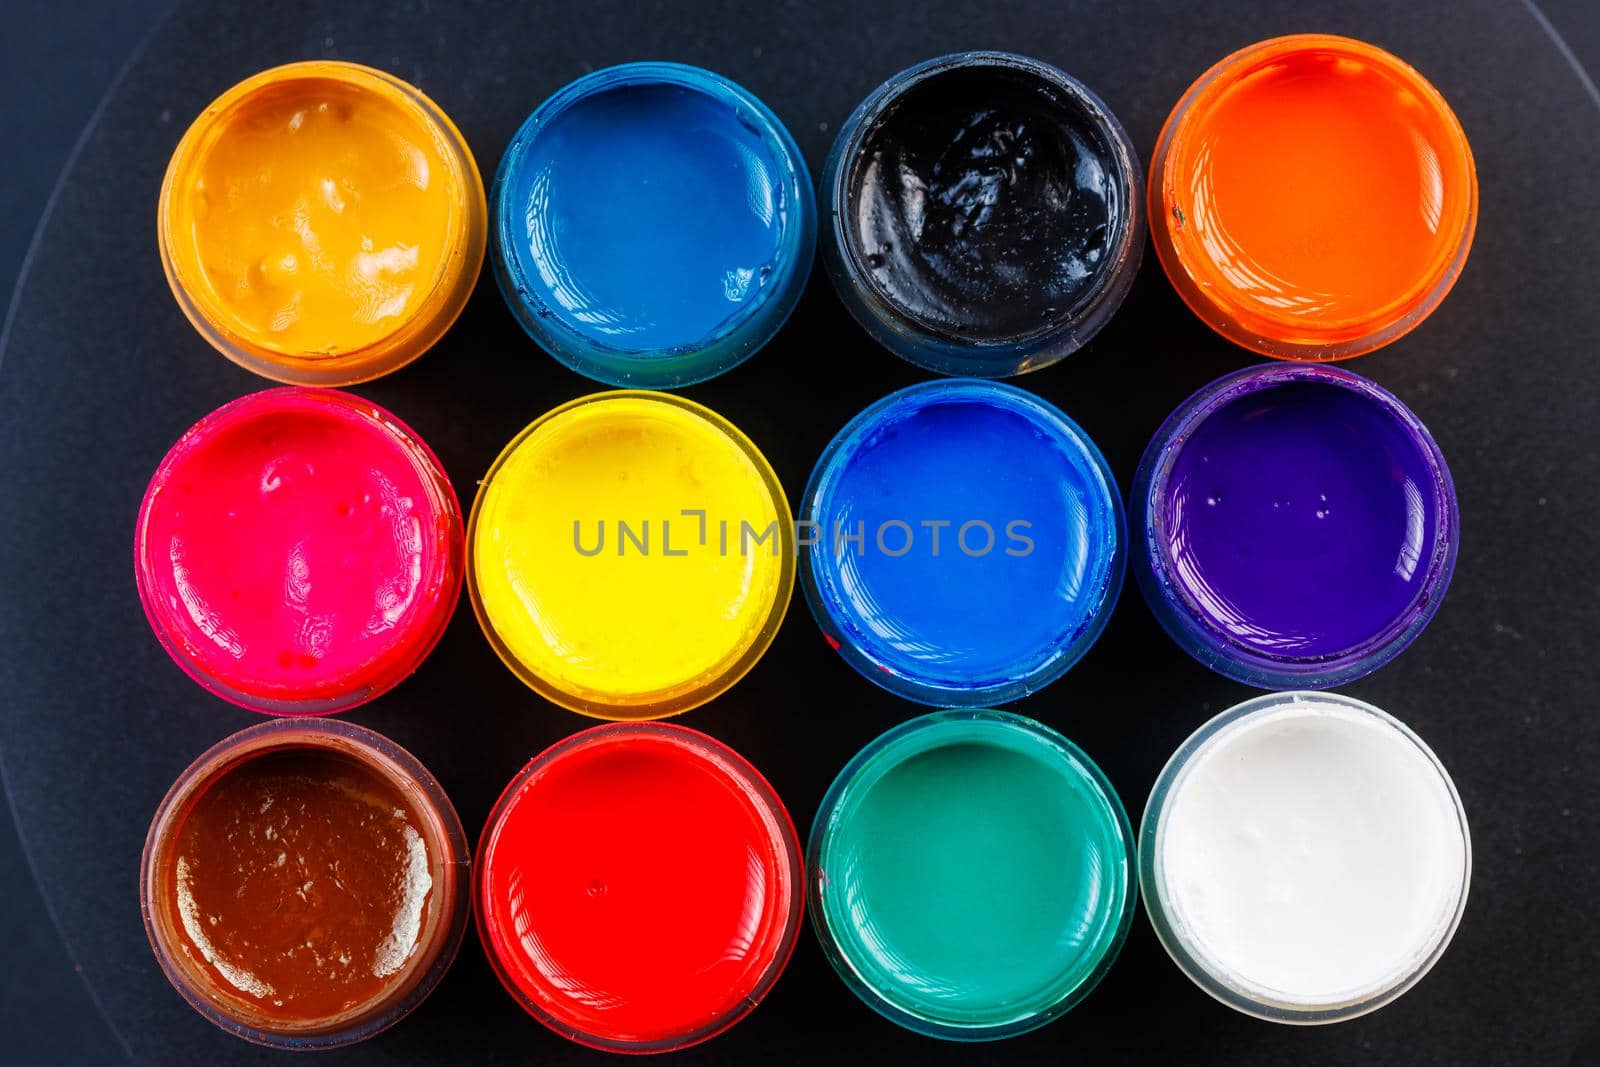 full-frame close-up background of opened small gouache paint jars on black